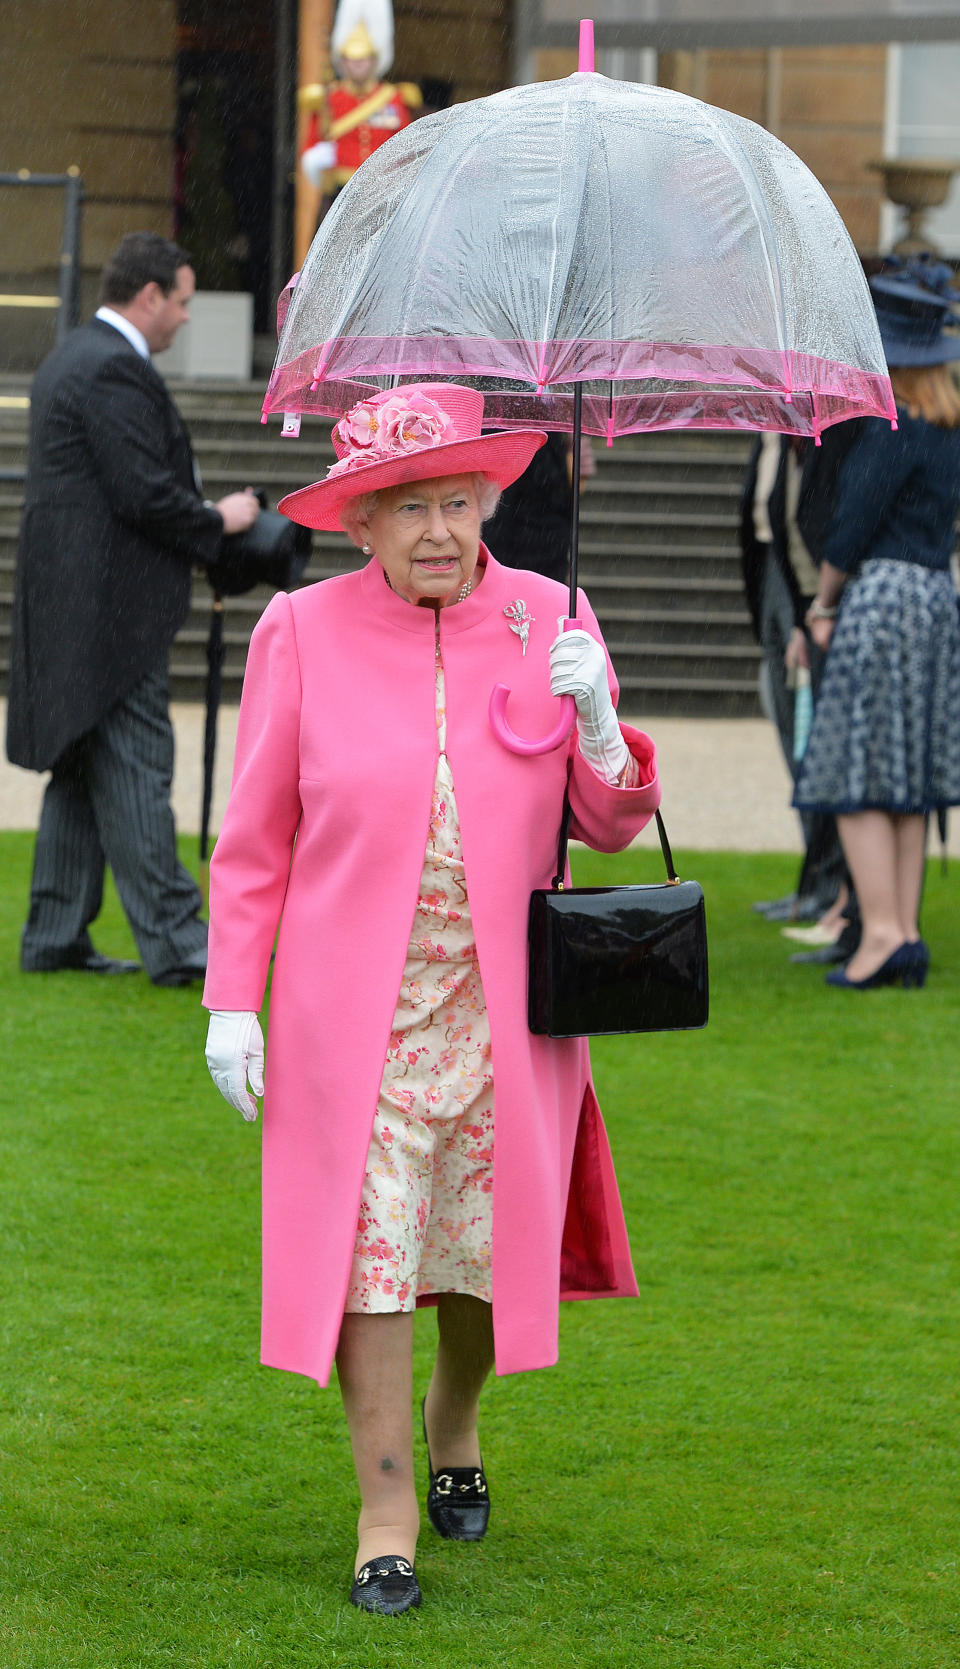 Britain's Queen Elizabeth II walks under an umbrella in the garden of Buckingham Palace in London as up to 8,000 guests attend the first royal garden party of the year on May 10, 2016.  / AFP / POOL / John Stillwell        (Photo credit should read JOHN STILLWELL/AFP/Getty Images)